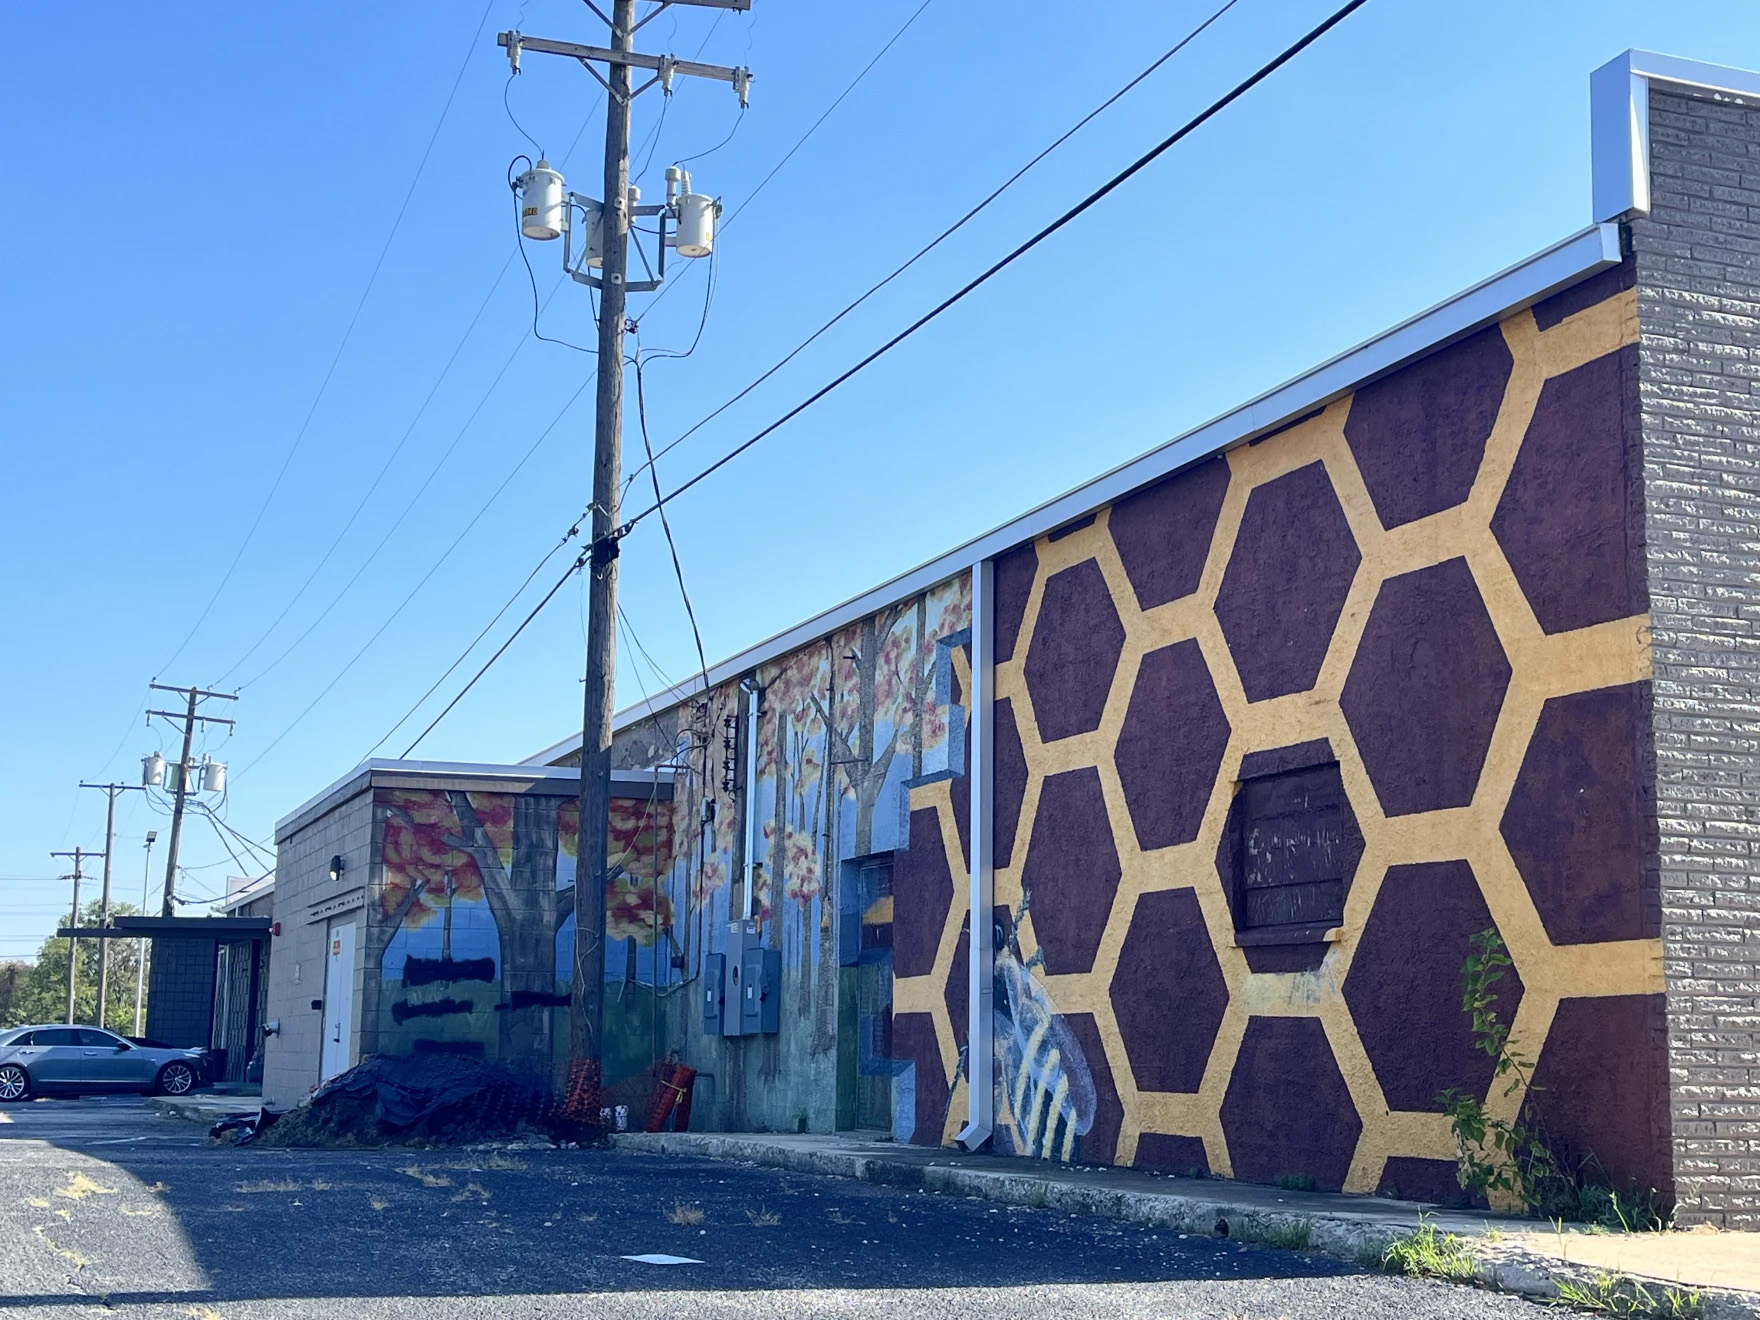 A mural is seen on the side of a building depicting a honeycomb pattern.